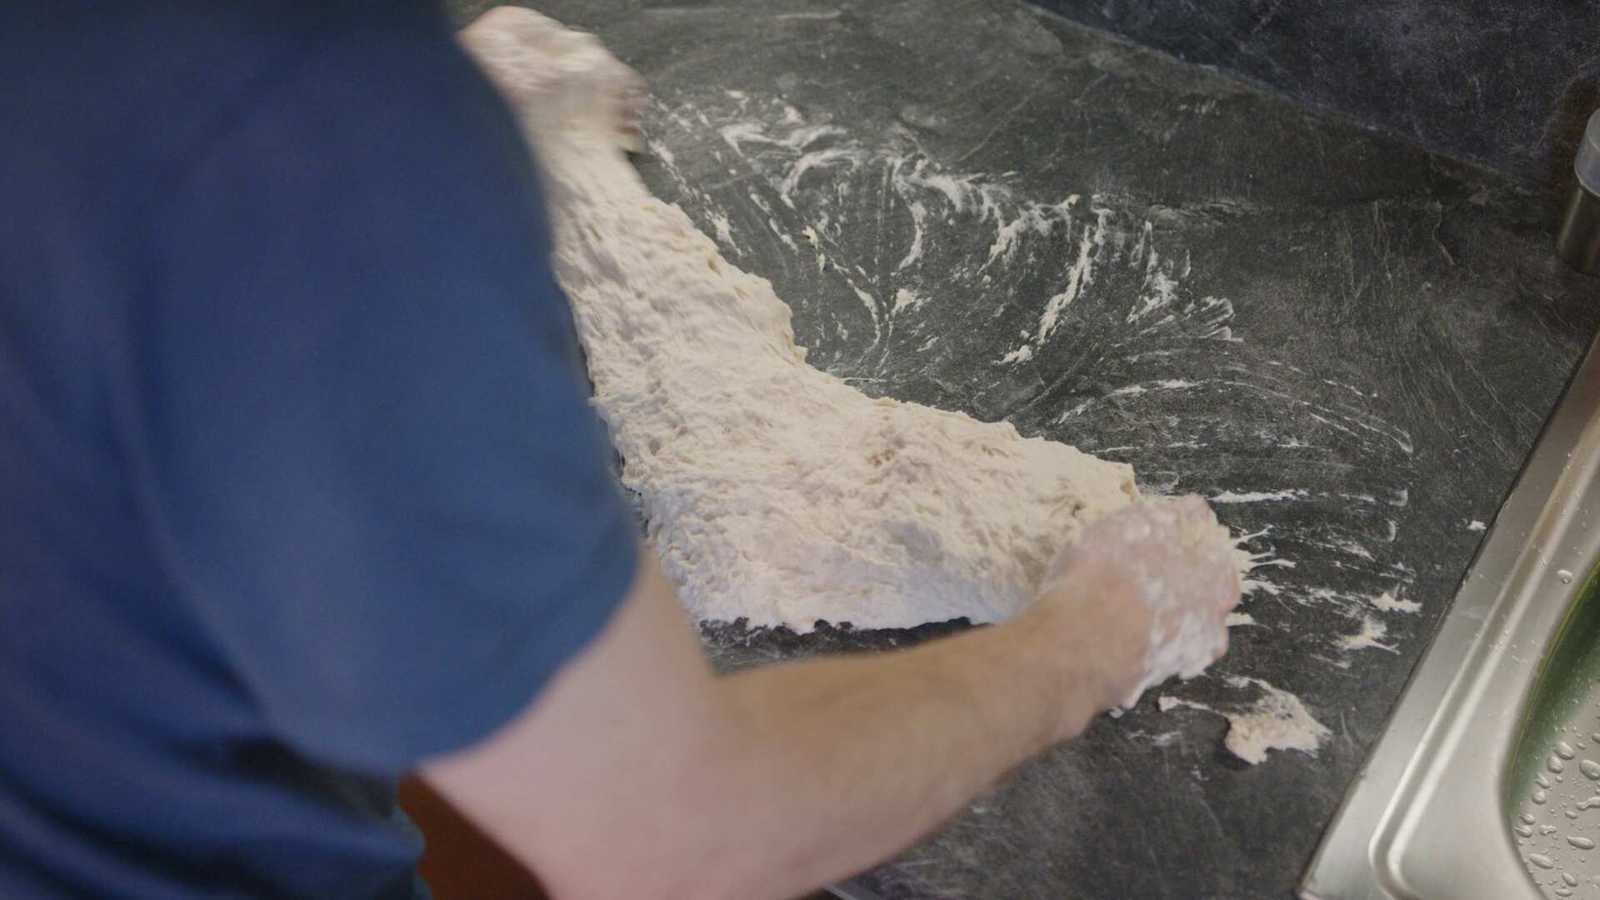 Wet dough being kneaded on work surface